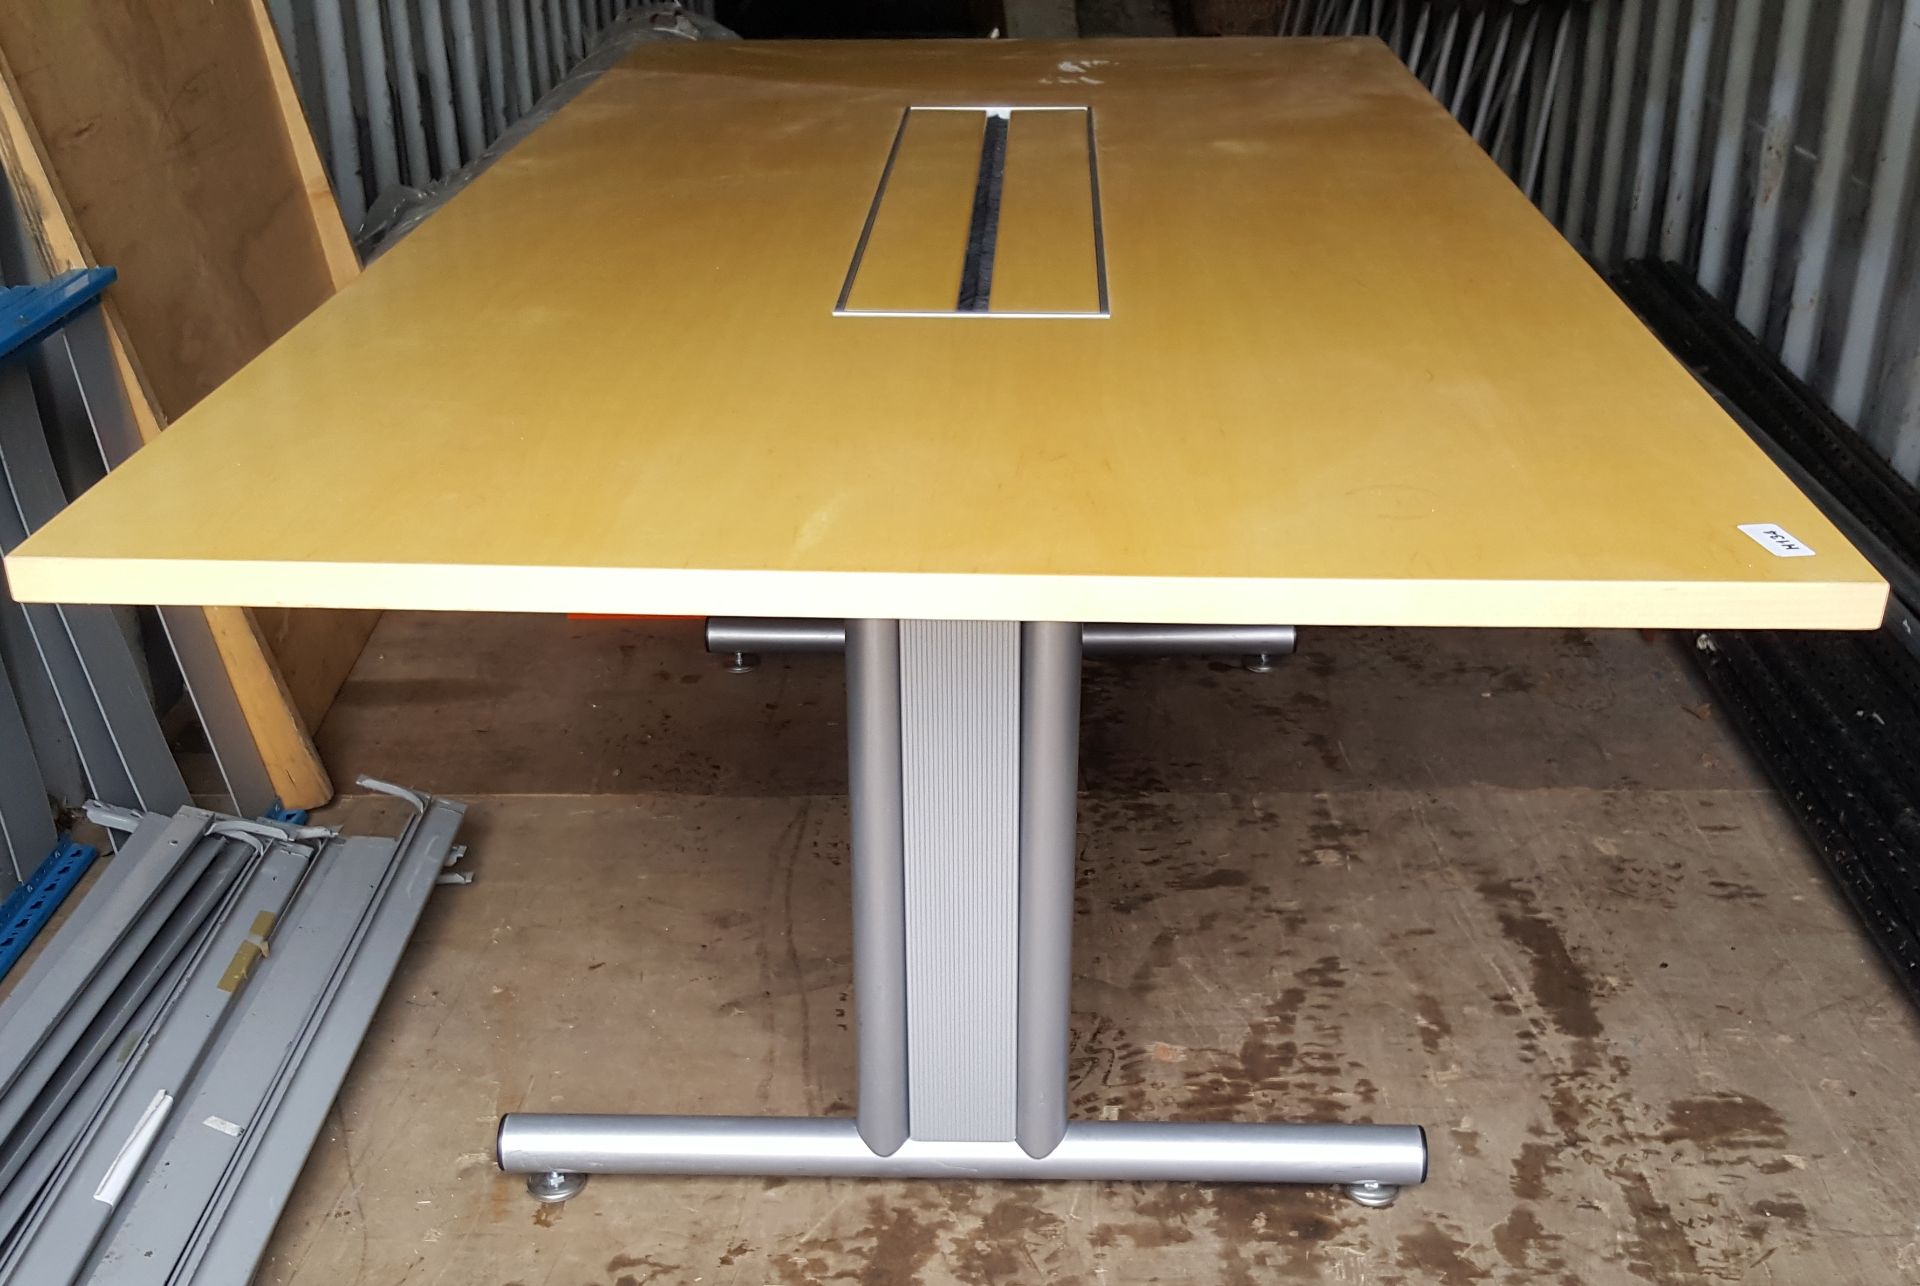 1 x Office Boardroom Meeting Table With Center Access For Cables - H73 x W200 x D100 cms - Ref H134 - Image 3 of 5